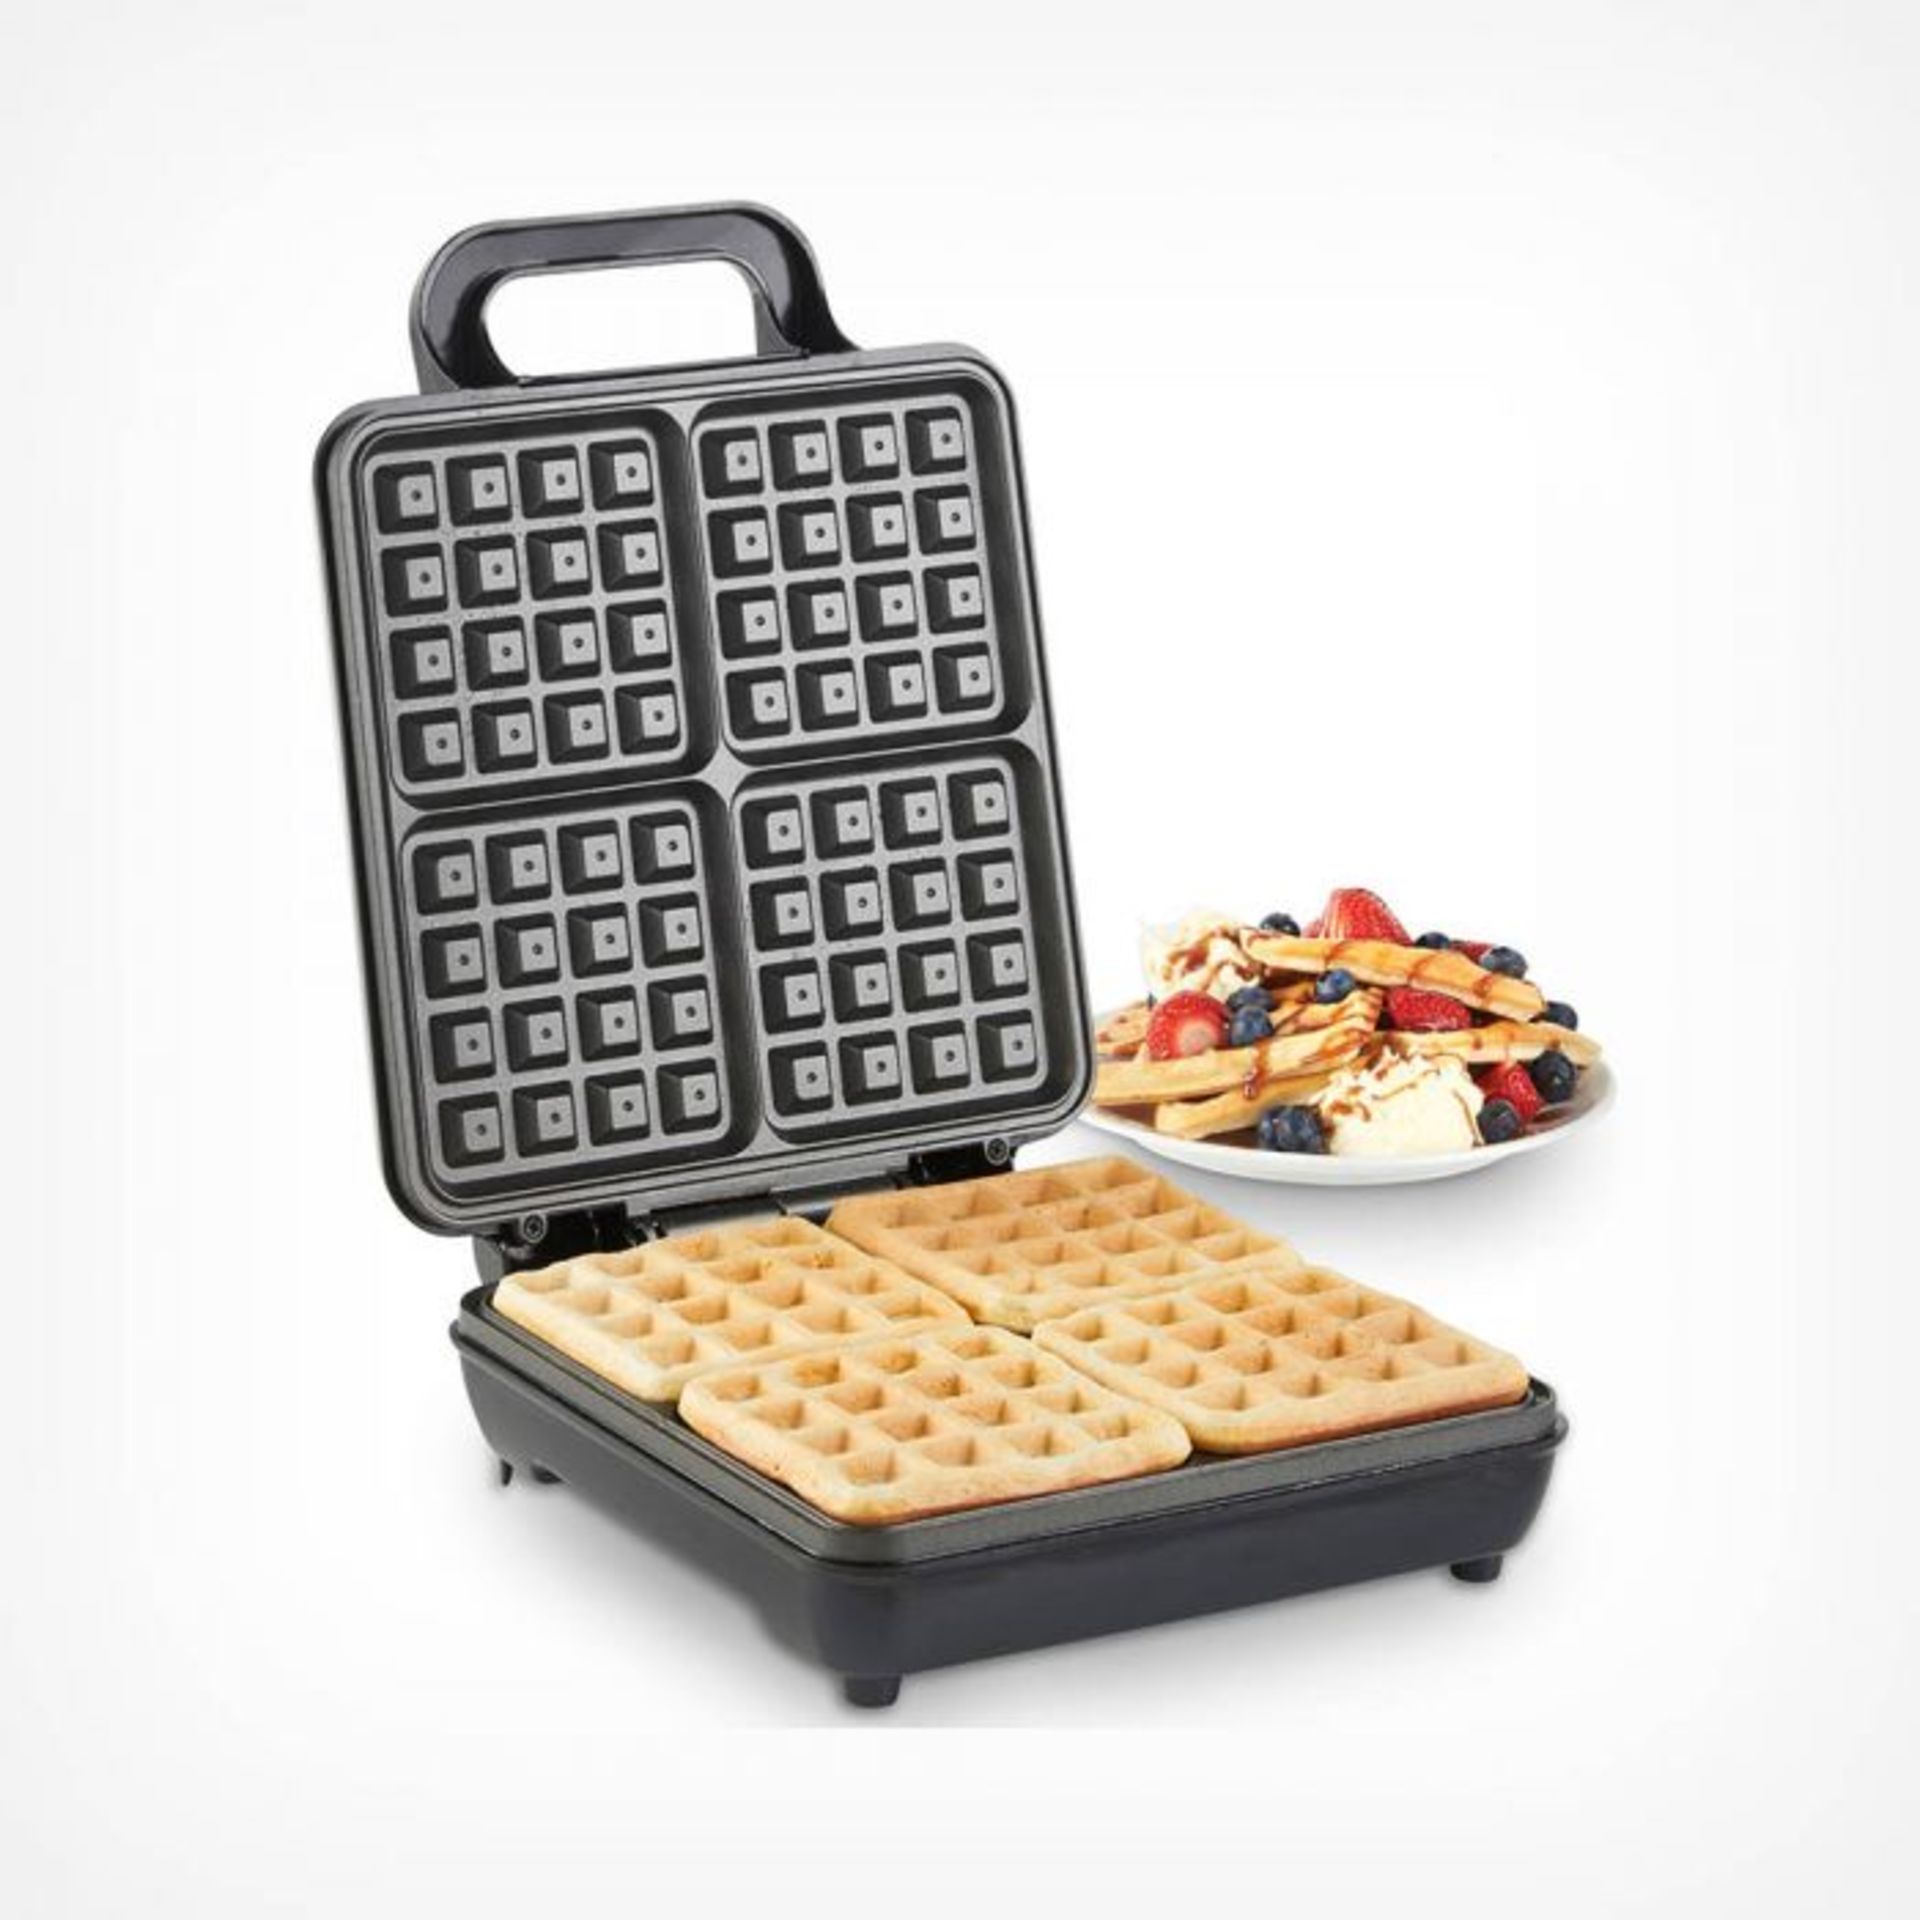 (NN15) Quad Waffle Maker Whip up four delicious waffles at once with the 1100W Quad Belgian W...